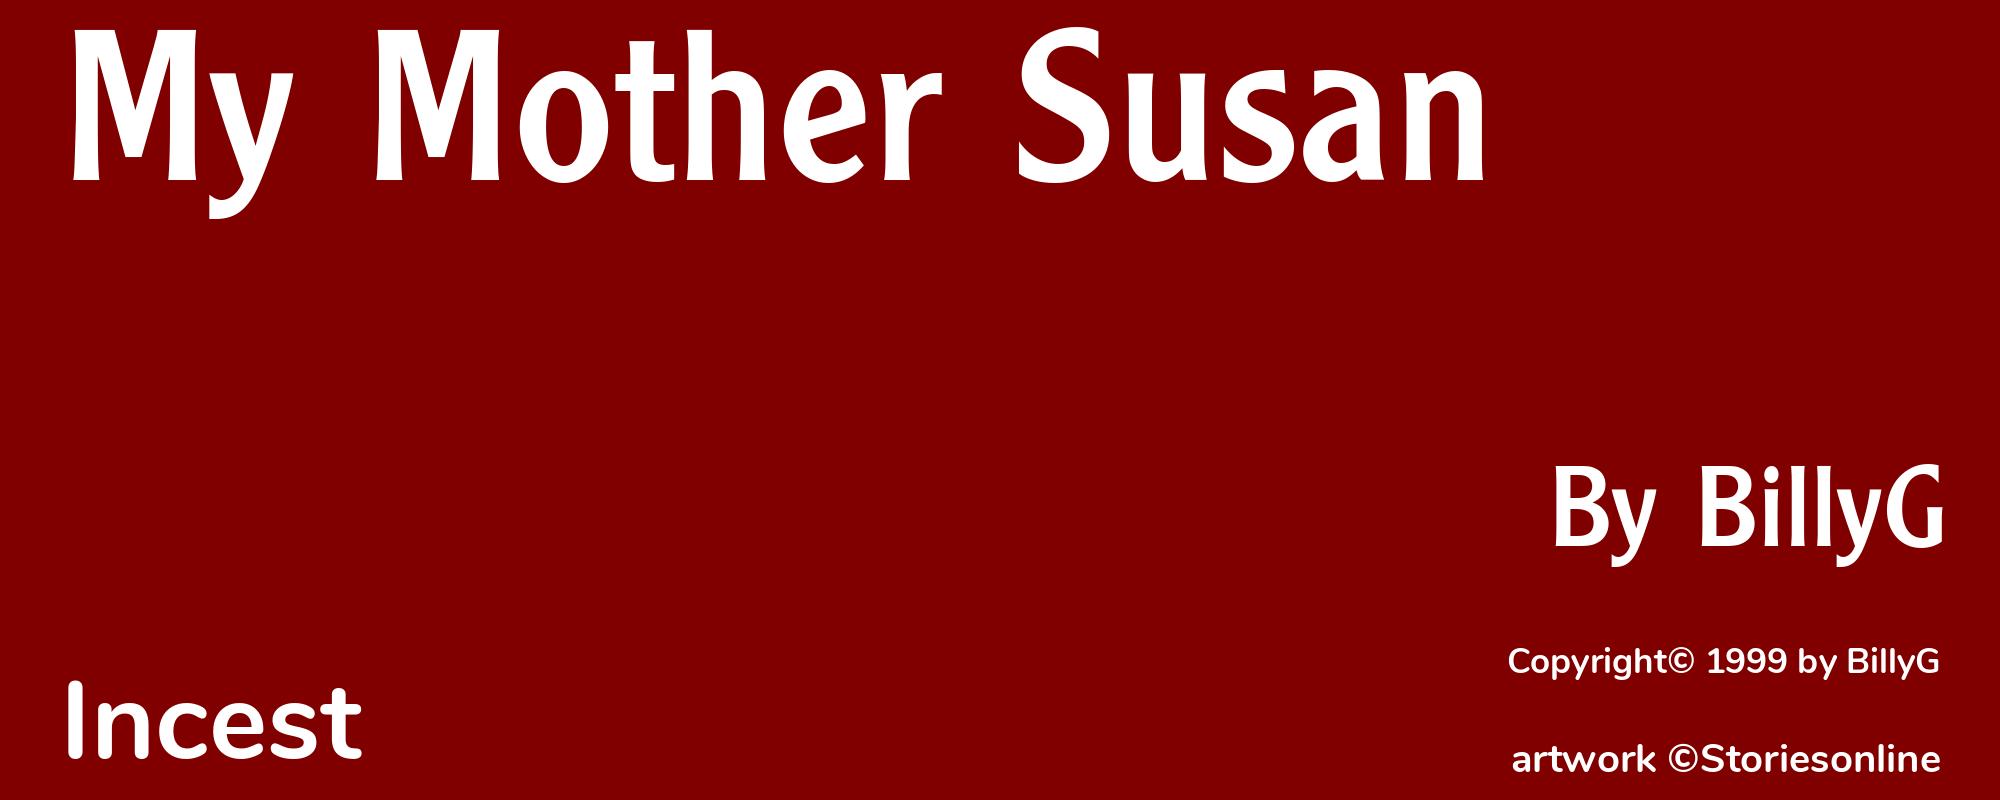 My Mother Susan - Cover